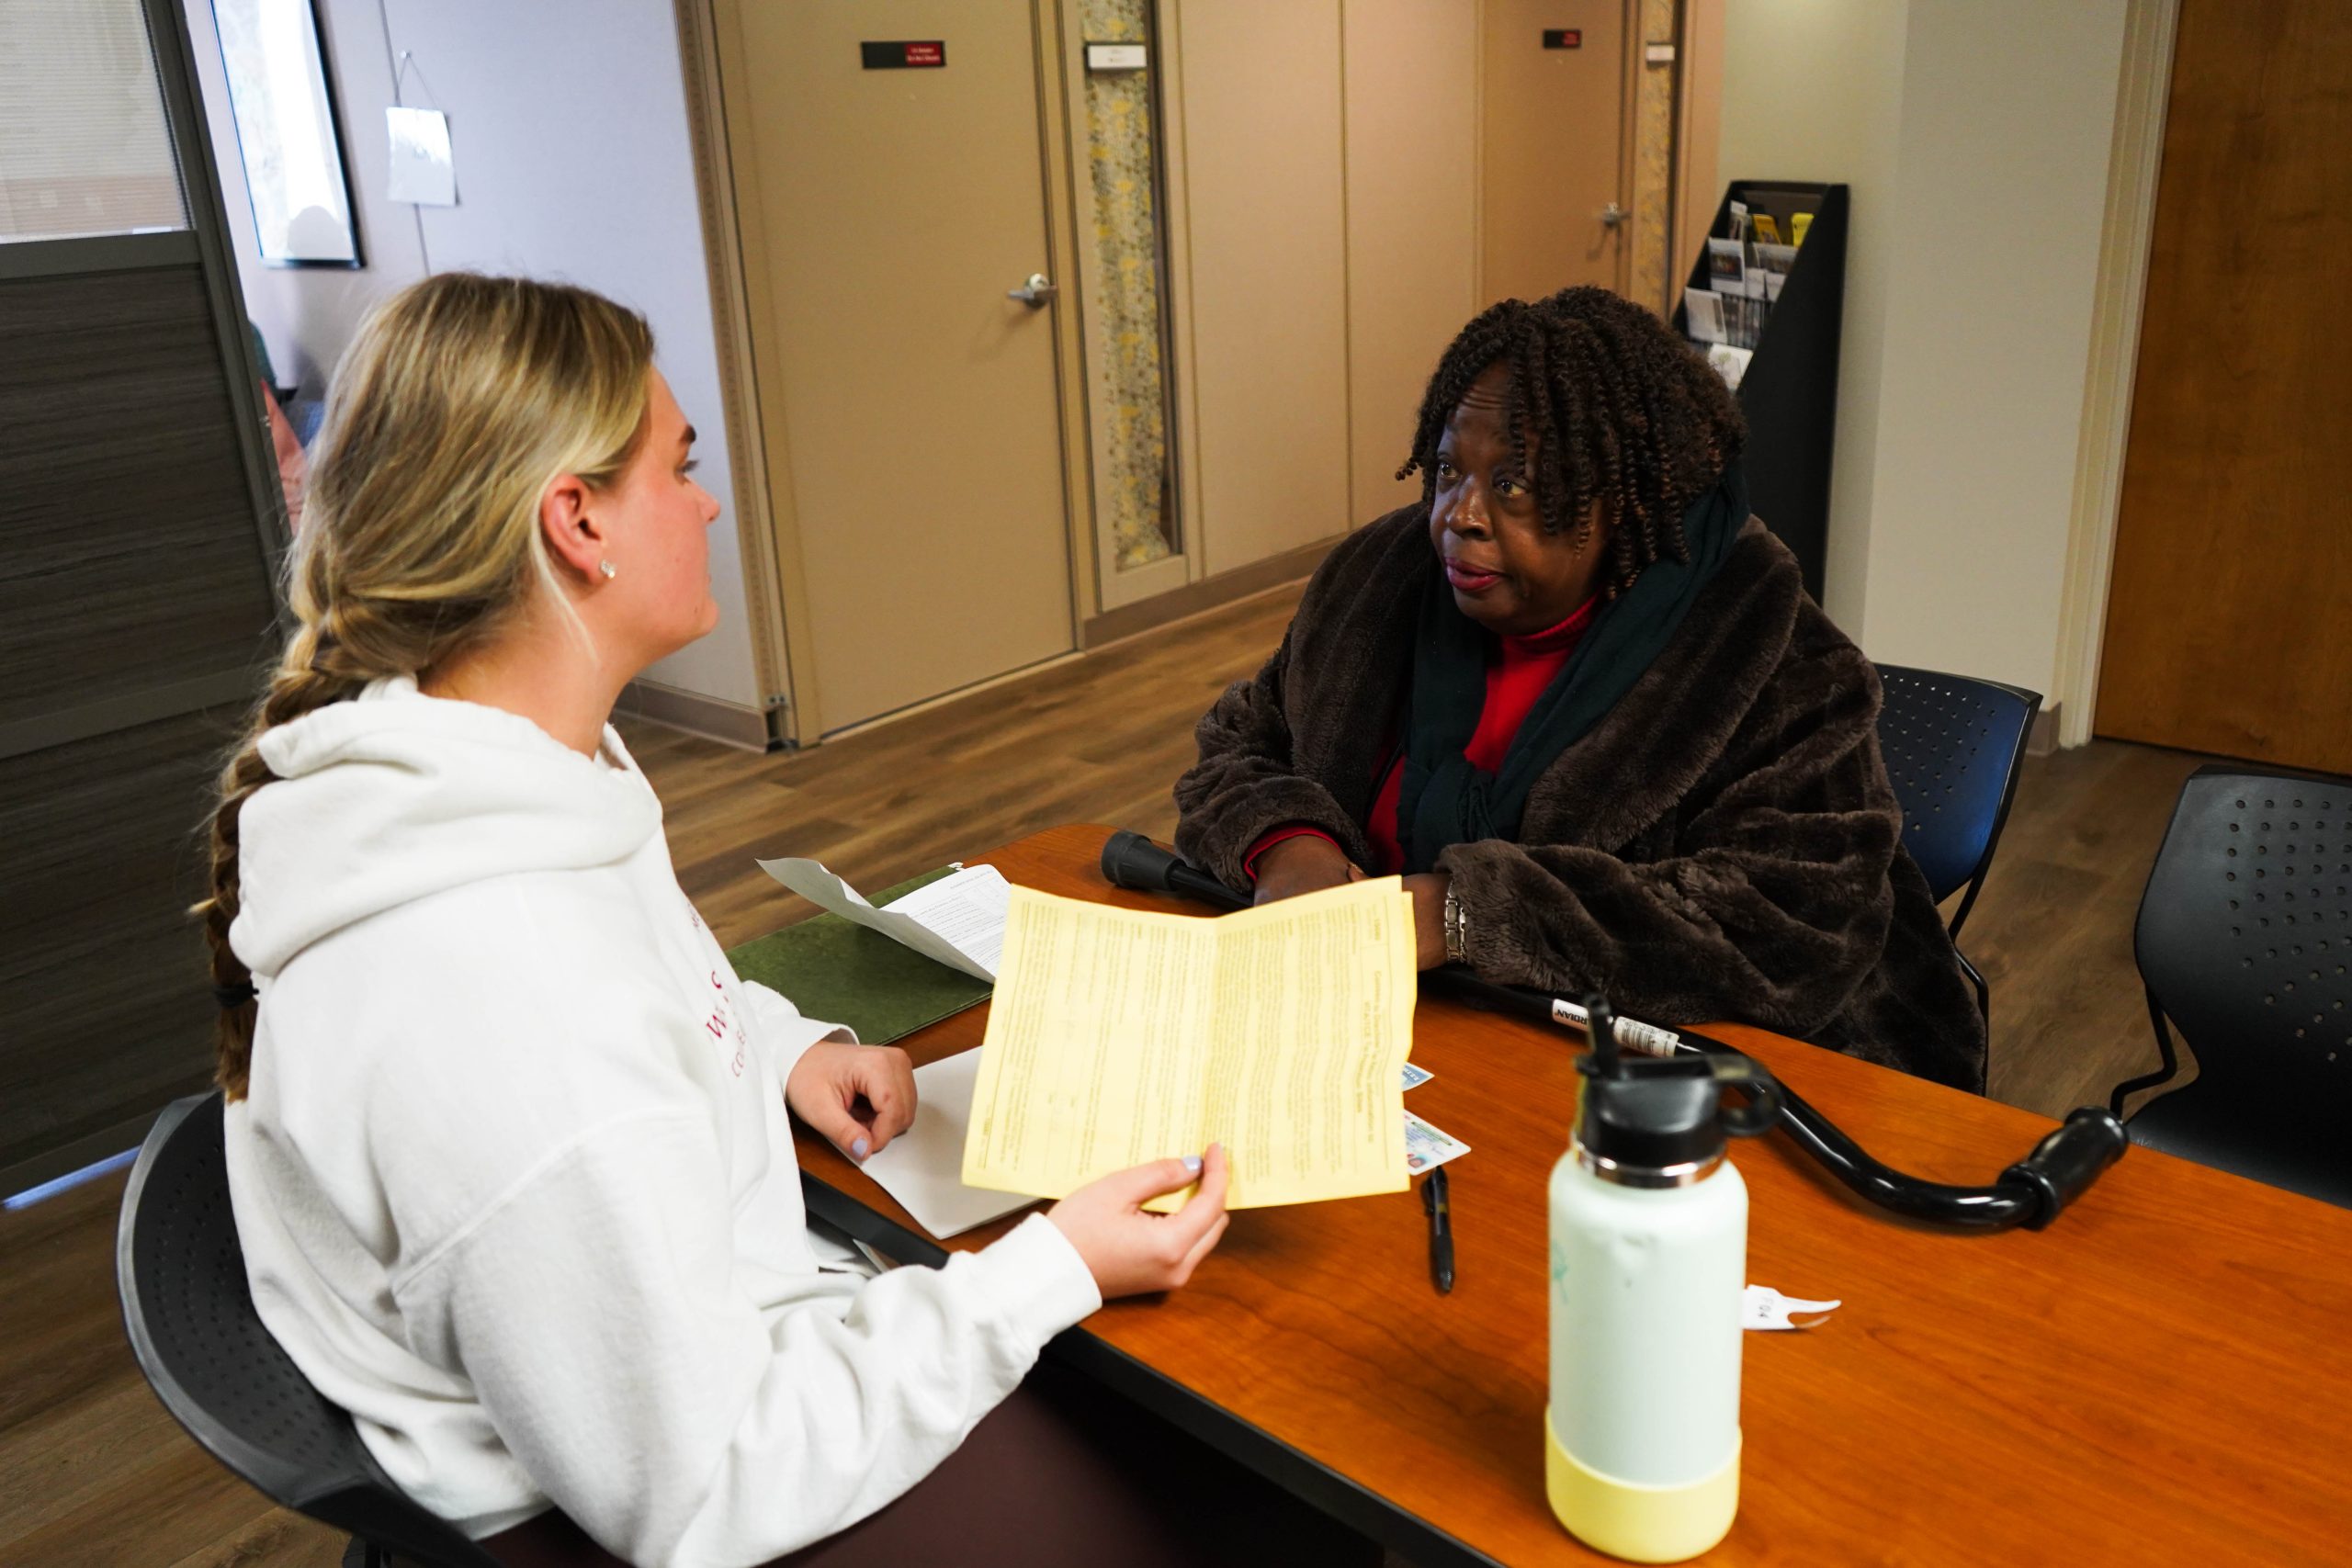 Personal Financial Planning student Sydney Kile helps Columbia resident Brenda Jones with her tax filing as part of the VITA tax prep service.